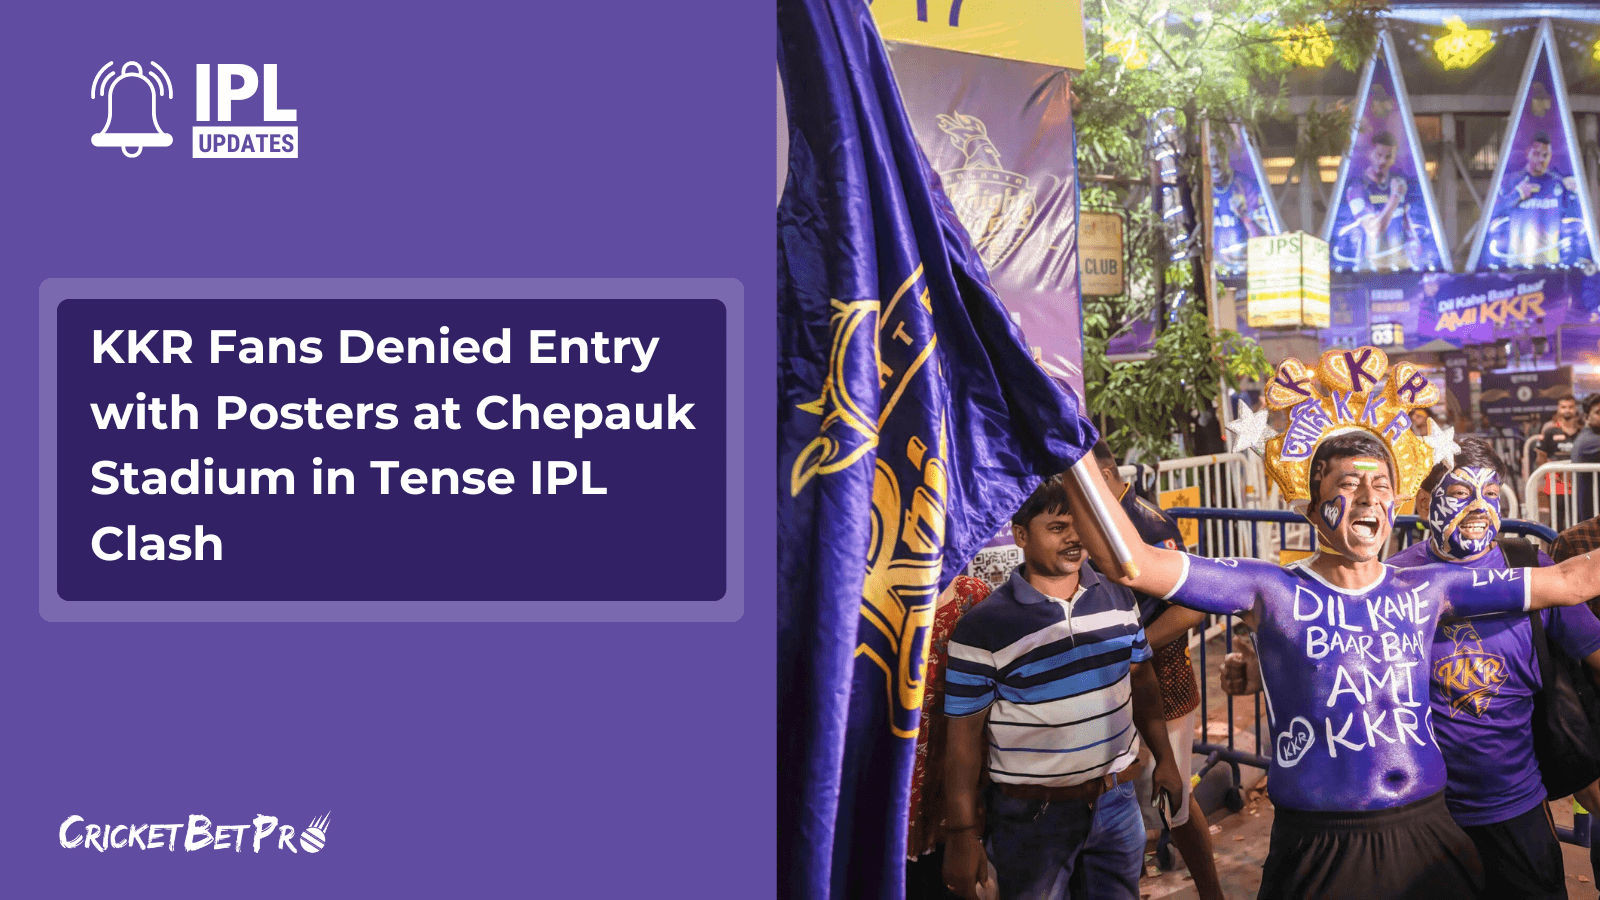 KKR Fans Denied Entry with Posters at Chepauk Stadium in Tense IPL Clash